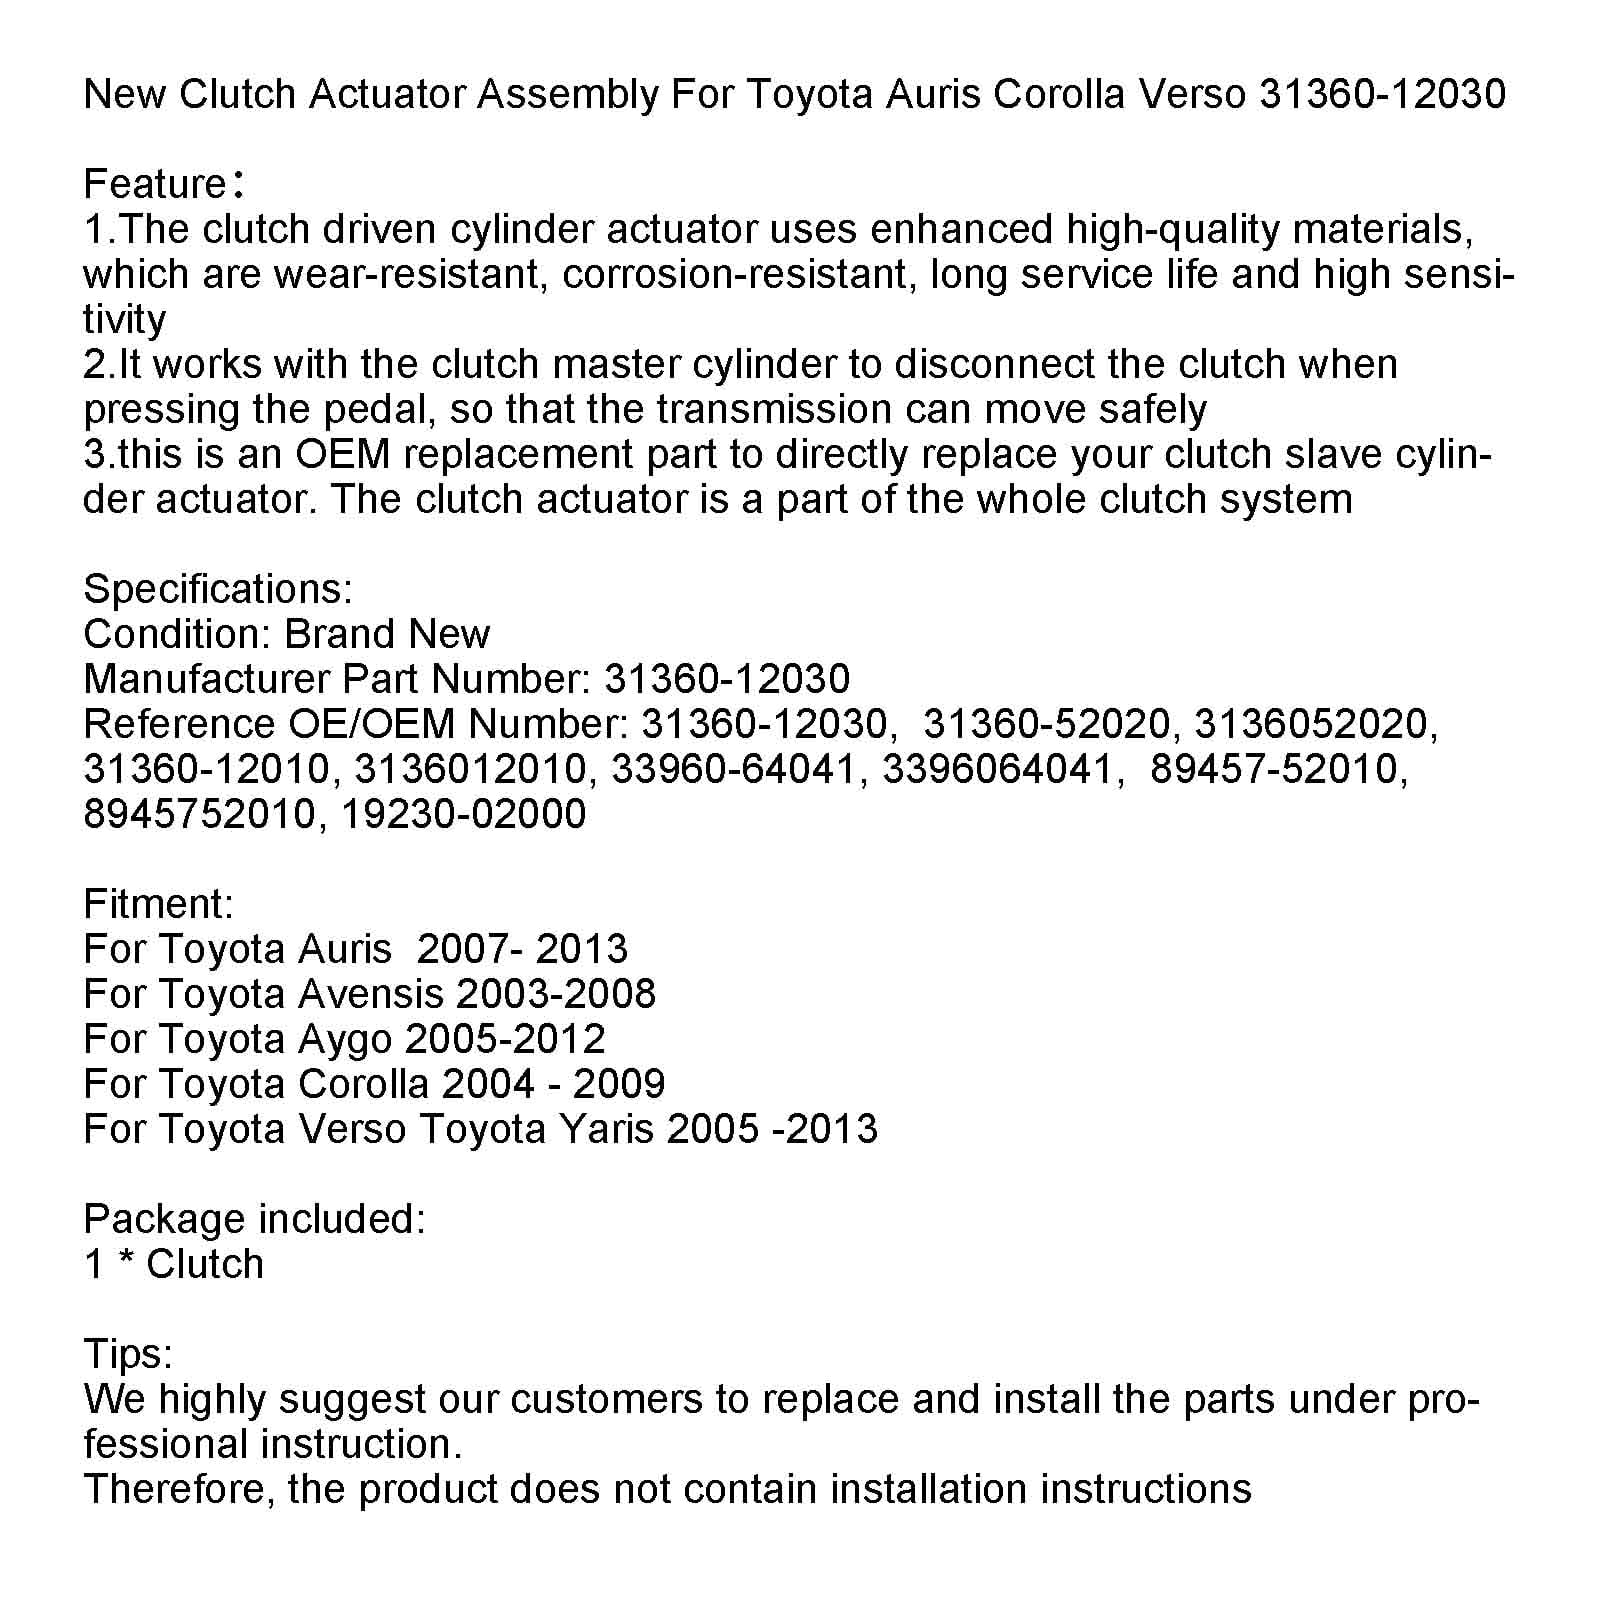 New Clutch Actuator Assembly For Toyota Auris Corolla Verso 31360